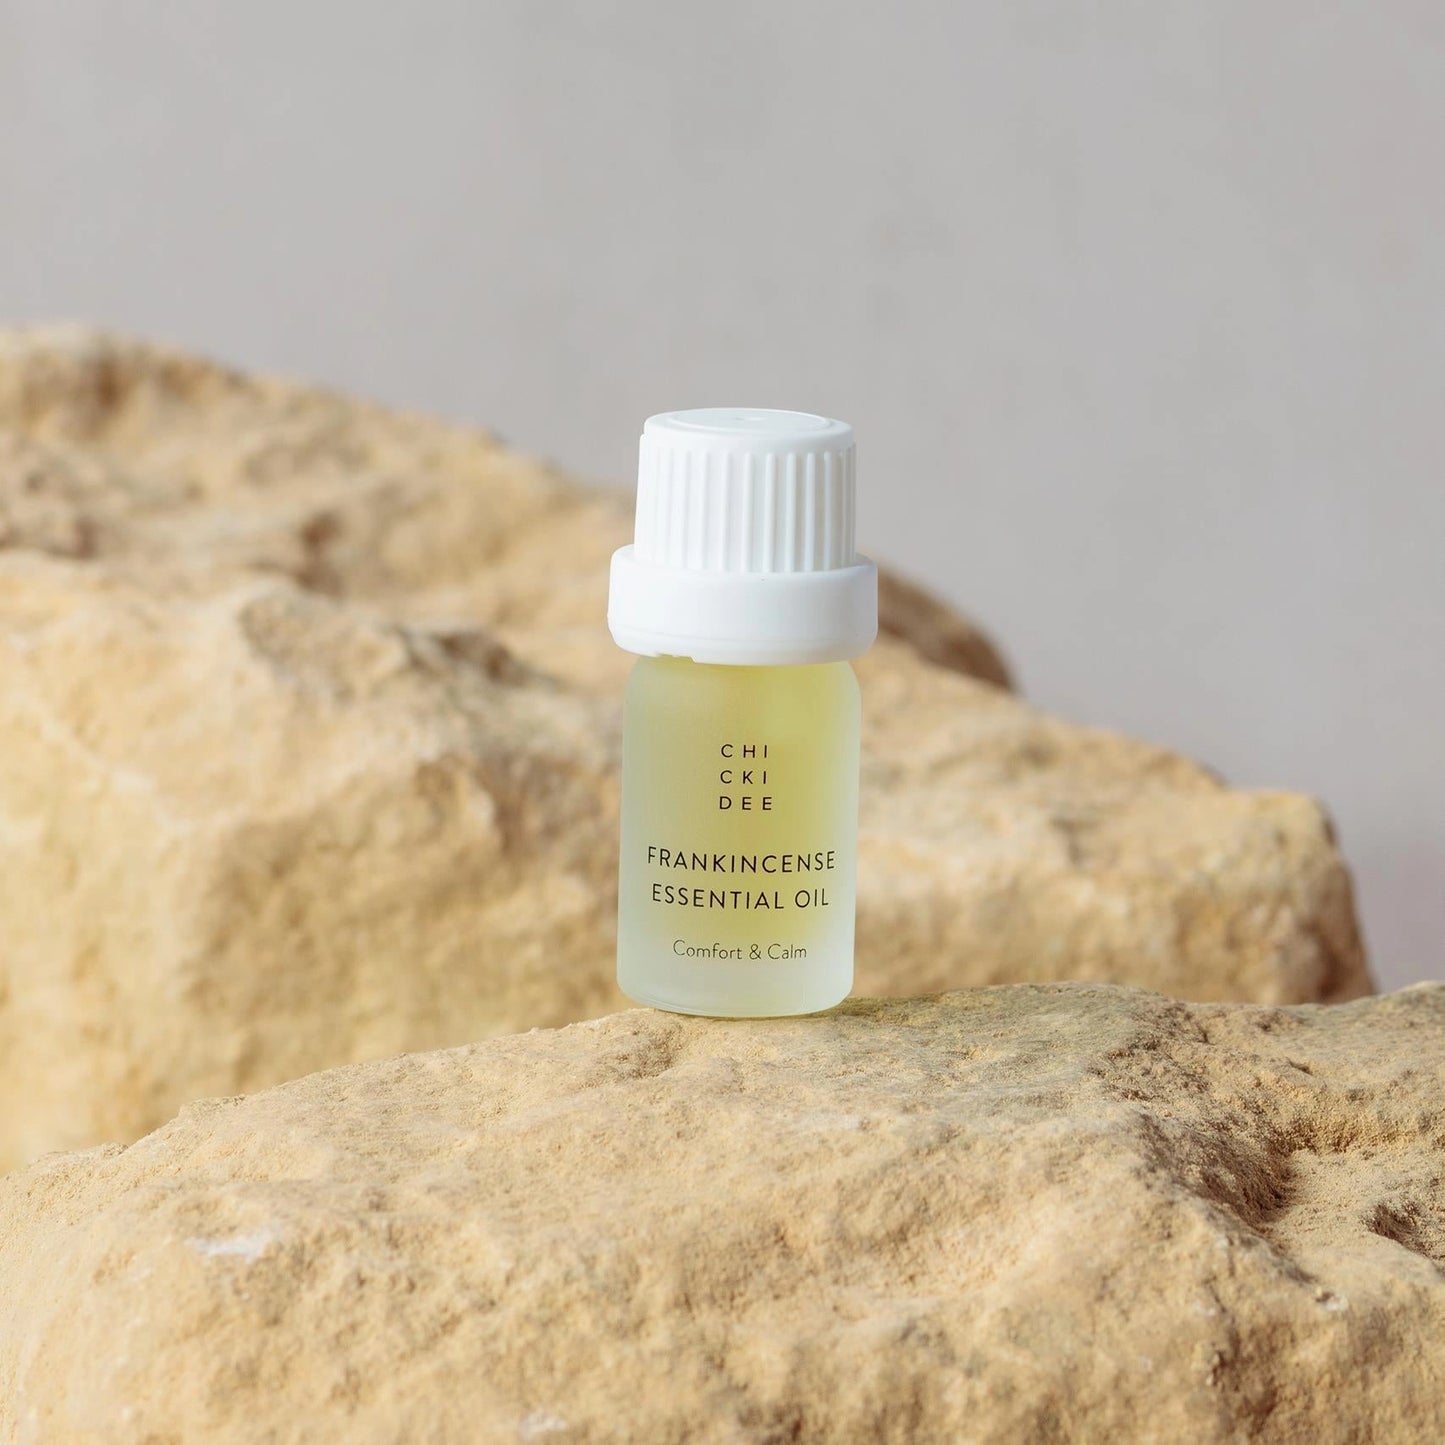 5 ml glass bottle with Frankincense essential oil on a rock